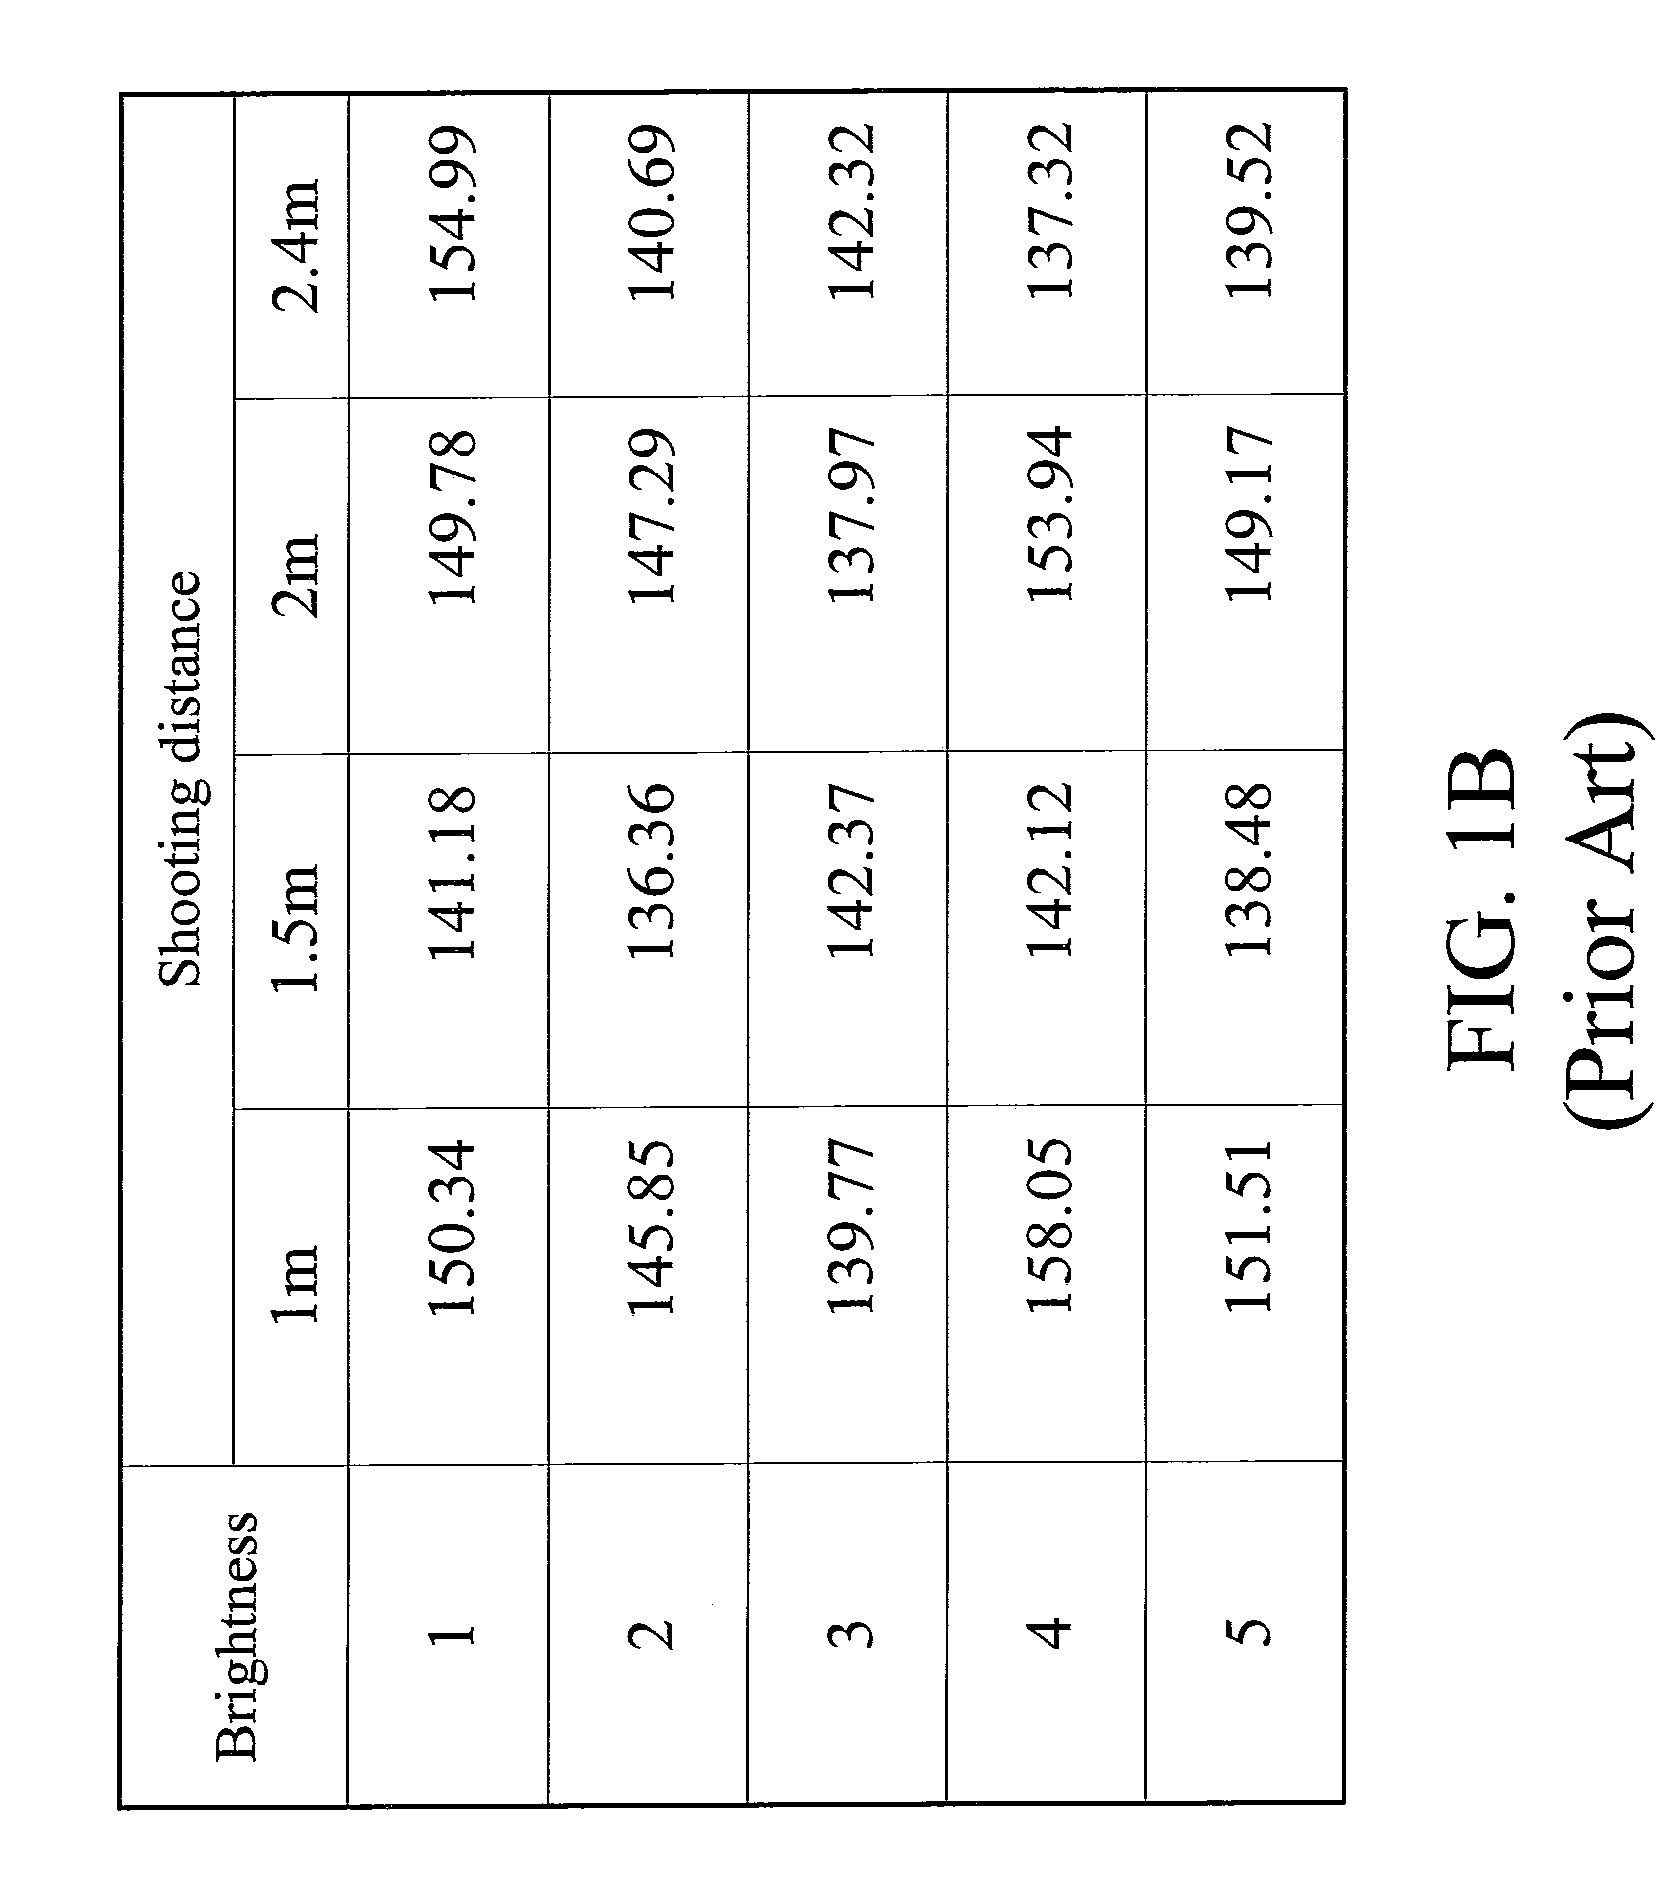 Image brightness compensation method and digital camera device with image brightness compensation function